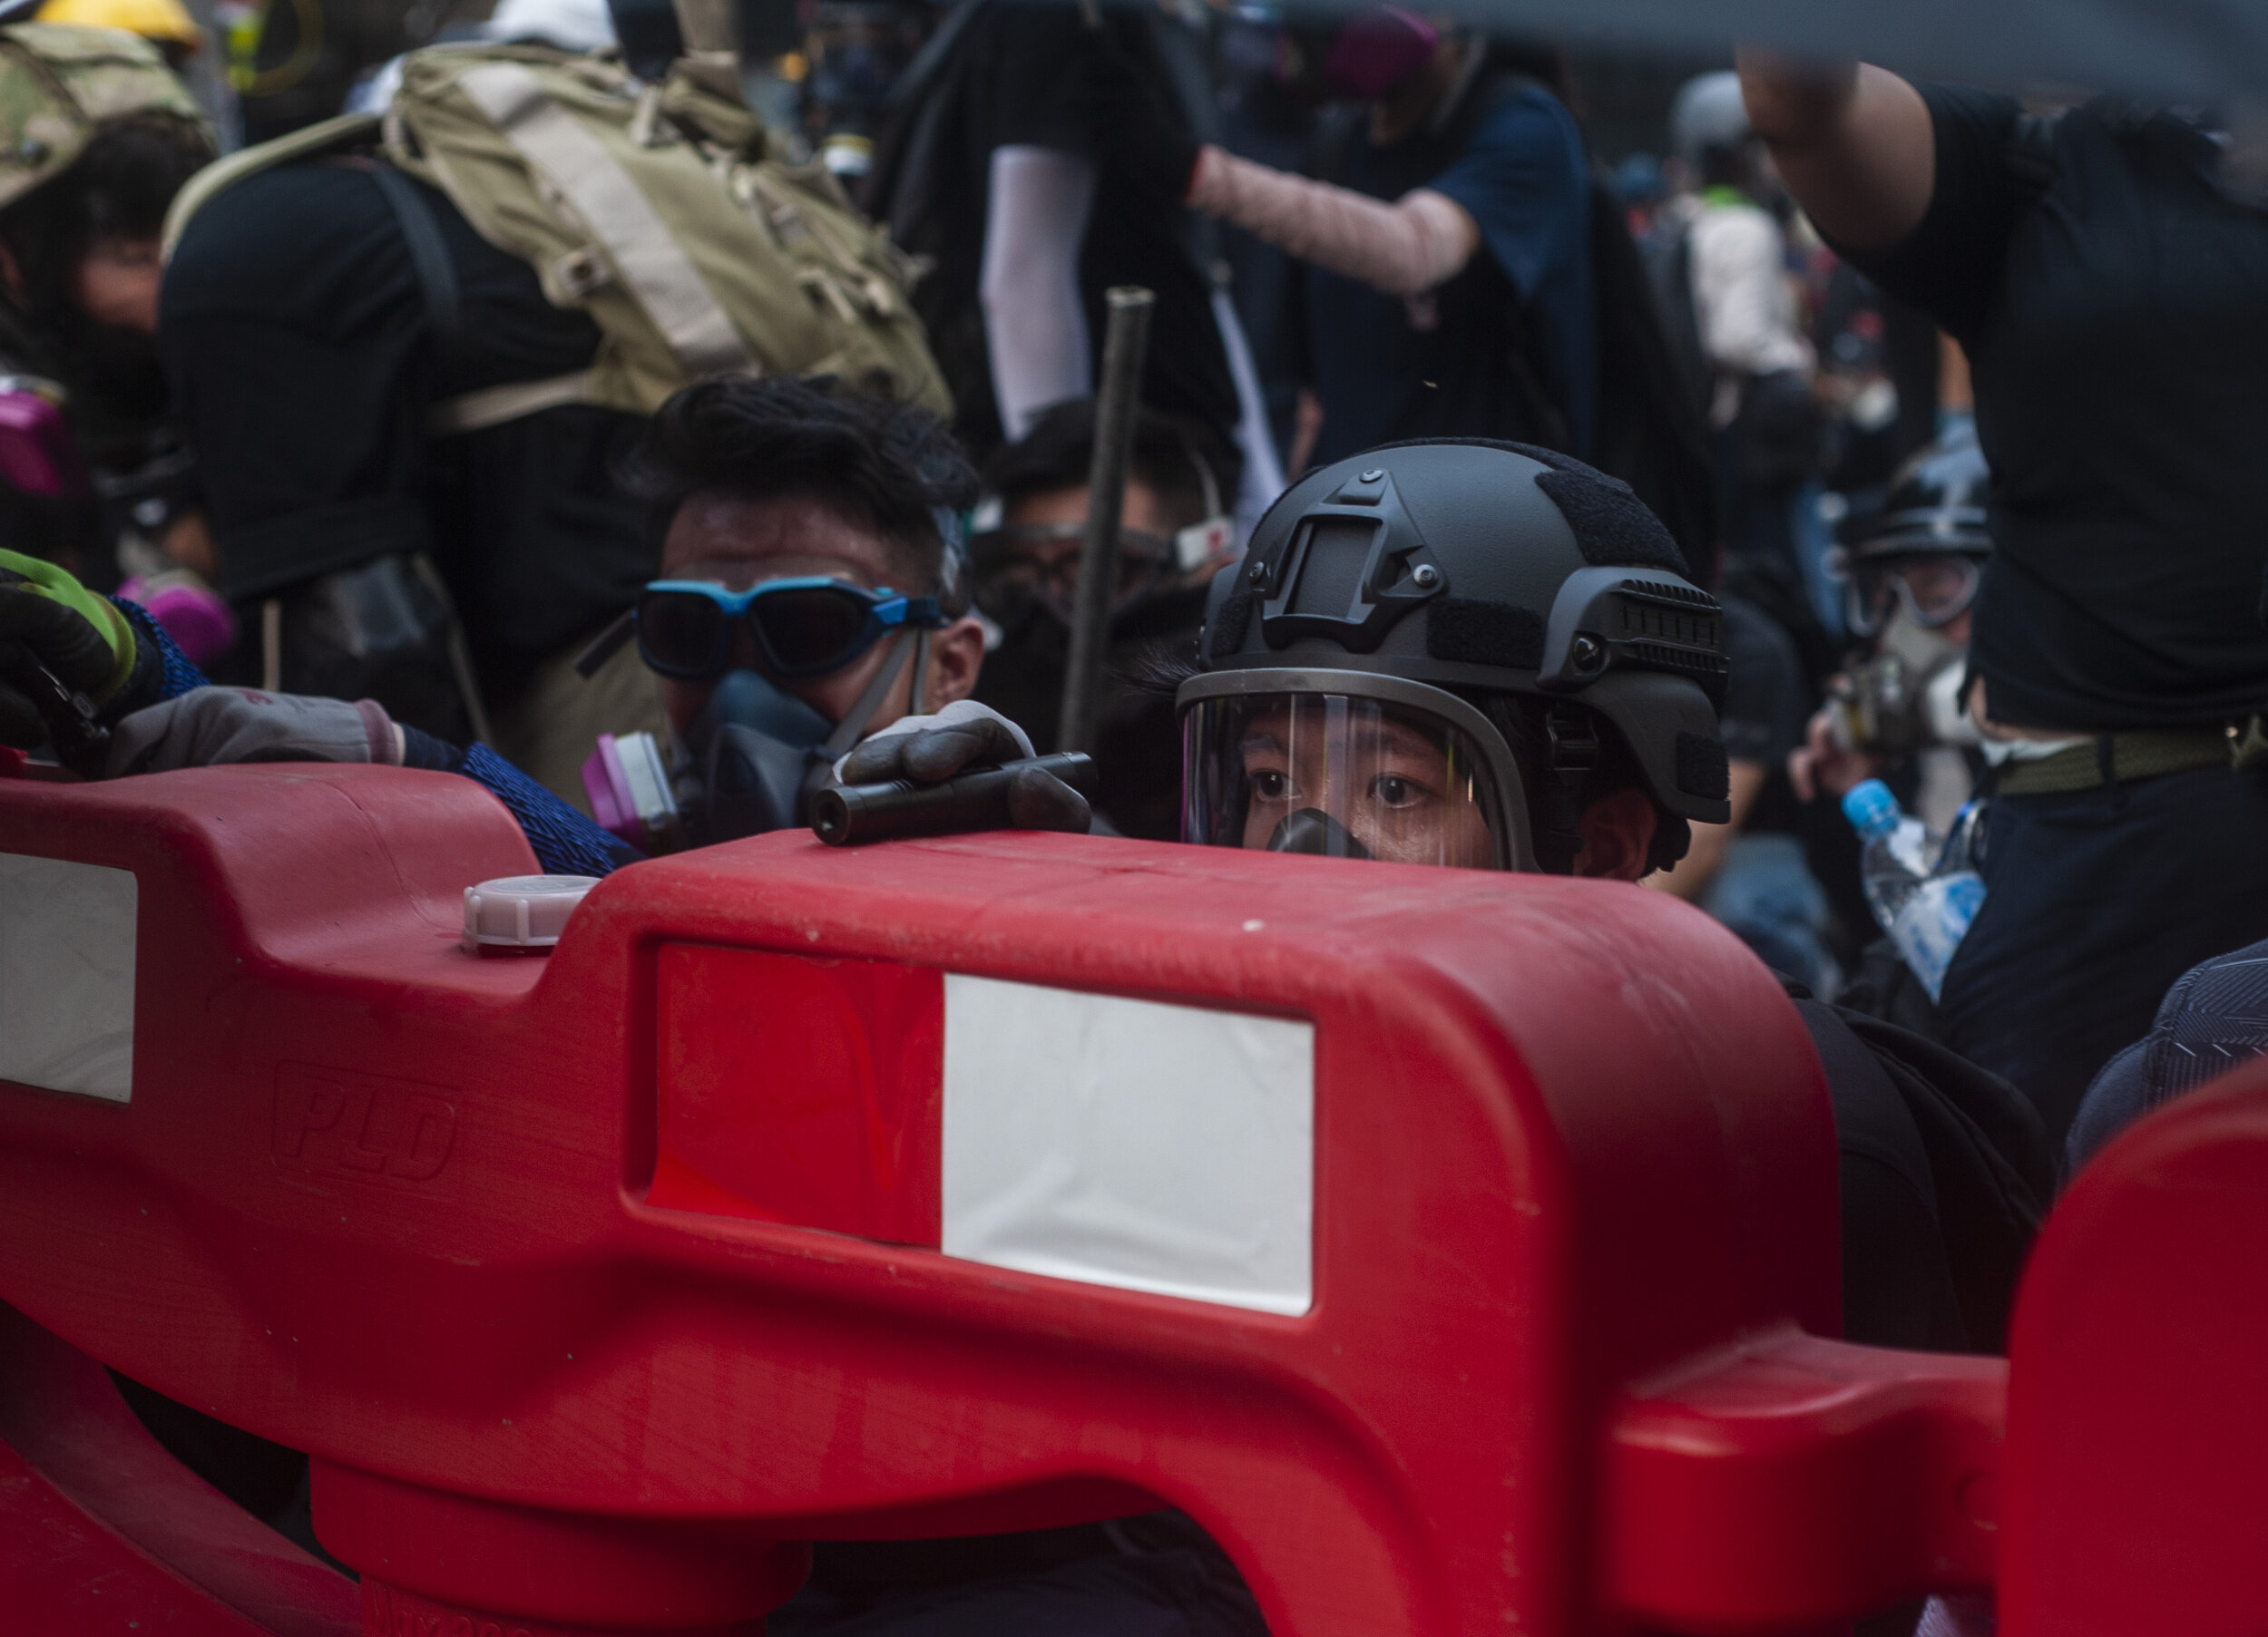  A pro-democracy protester peers over a makeshift barricade at advancing riot police during a heavy clash in Kwun Tong on August 24, 2019.  